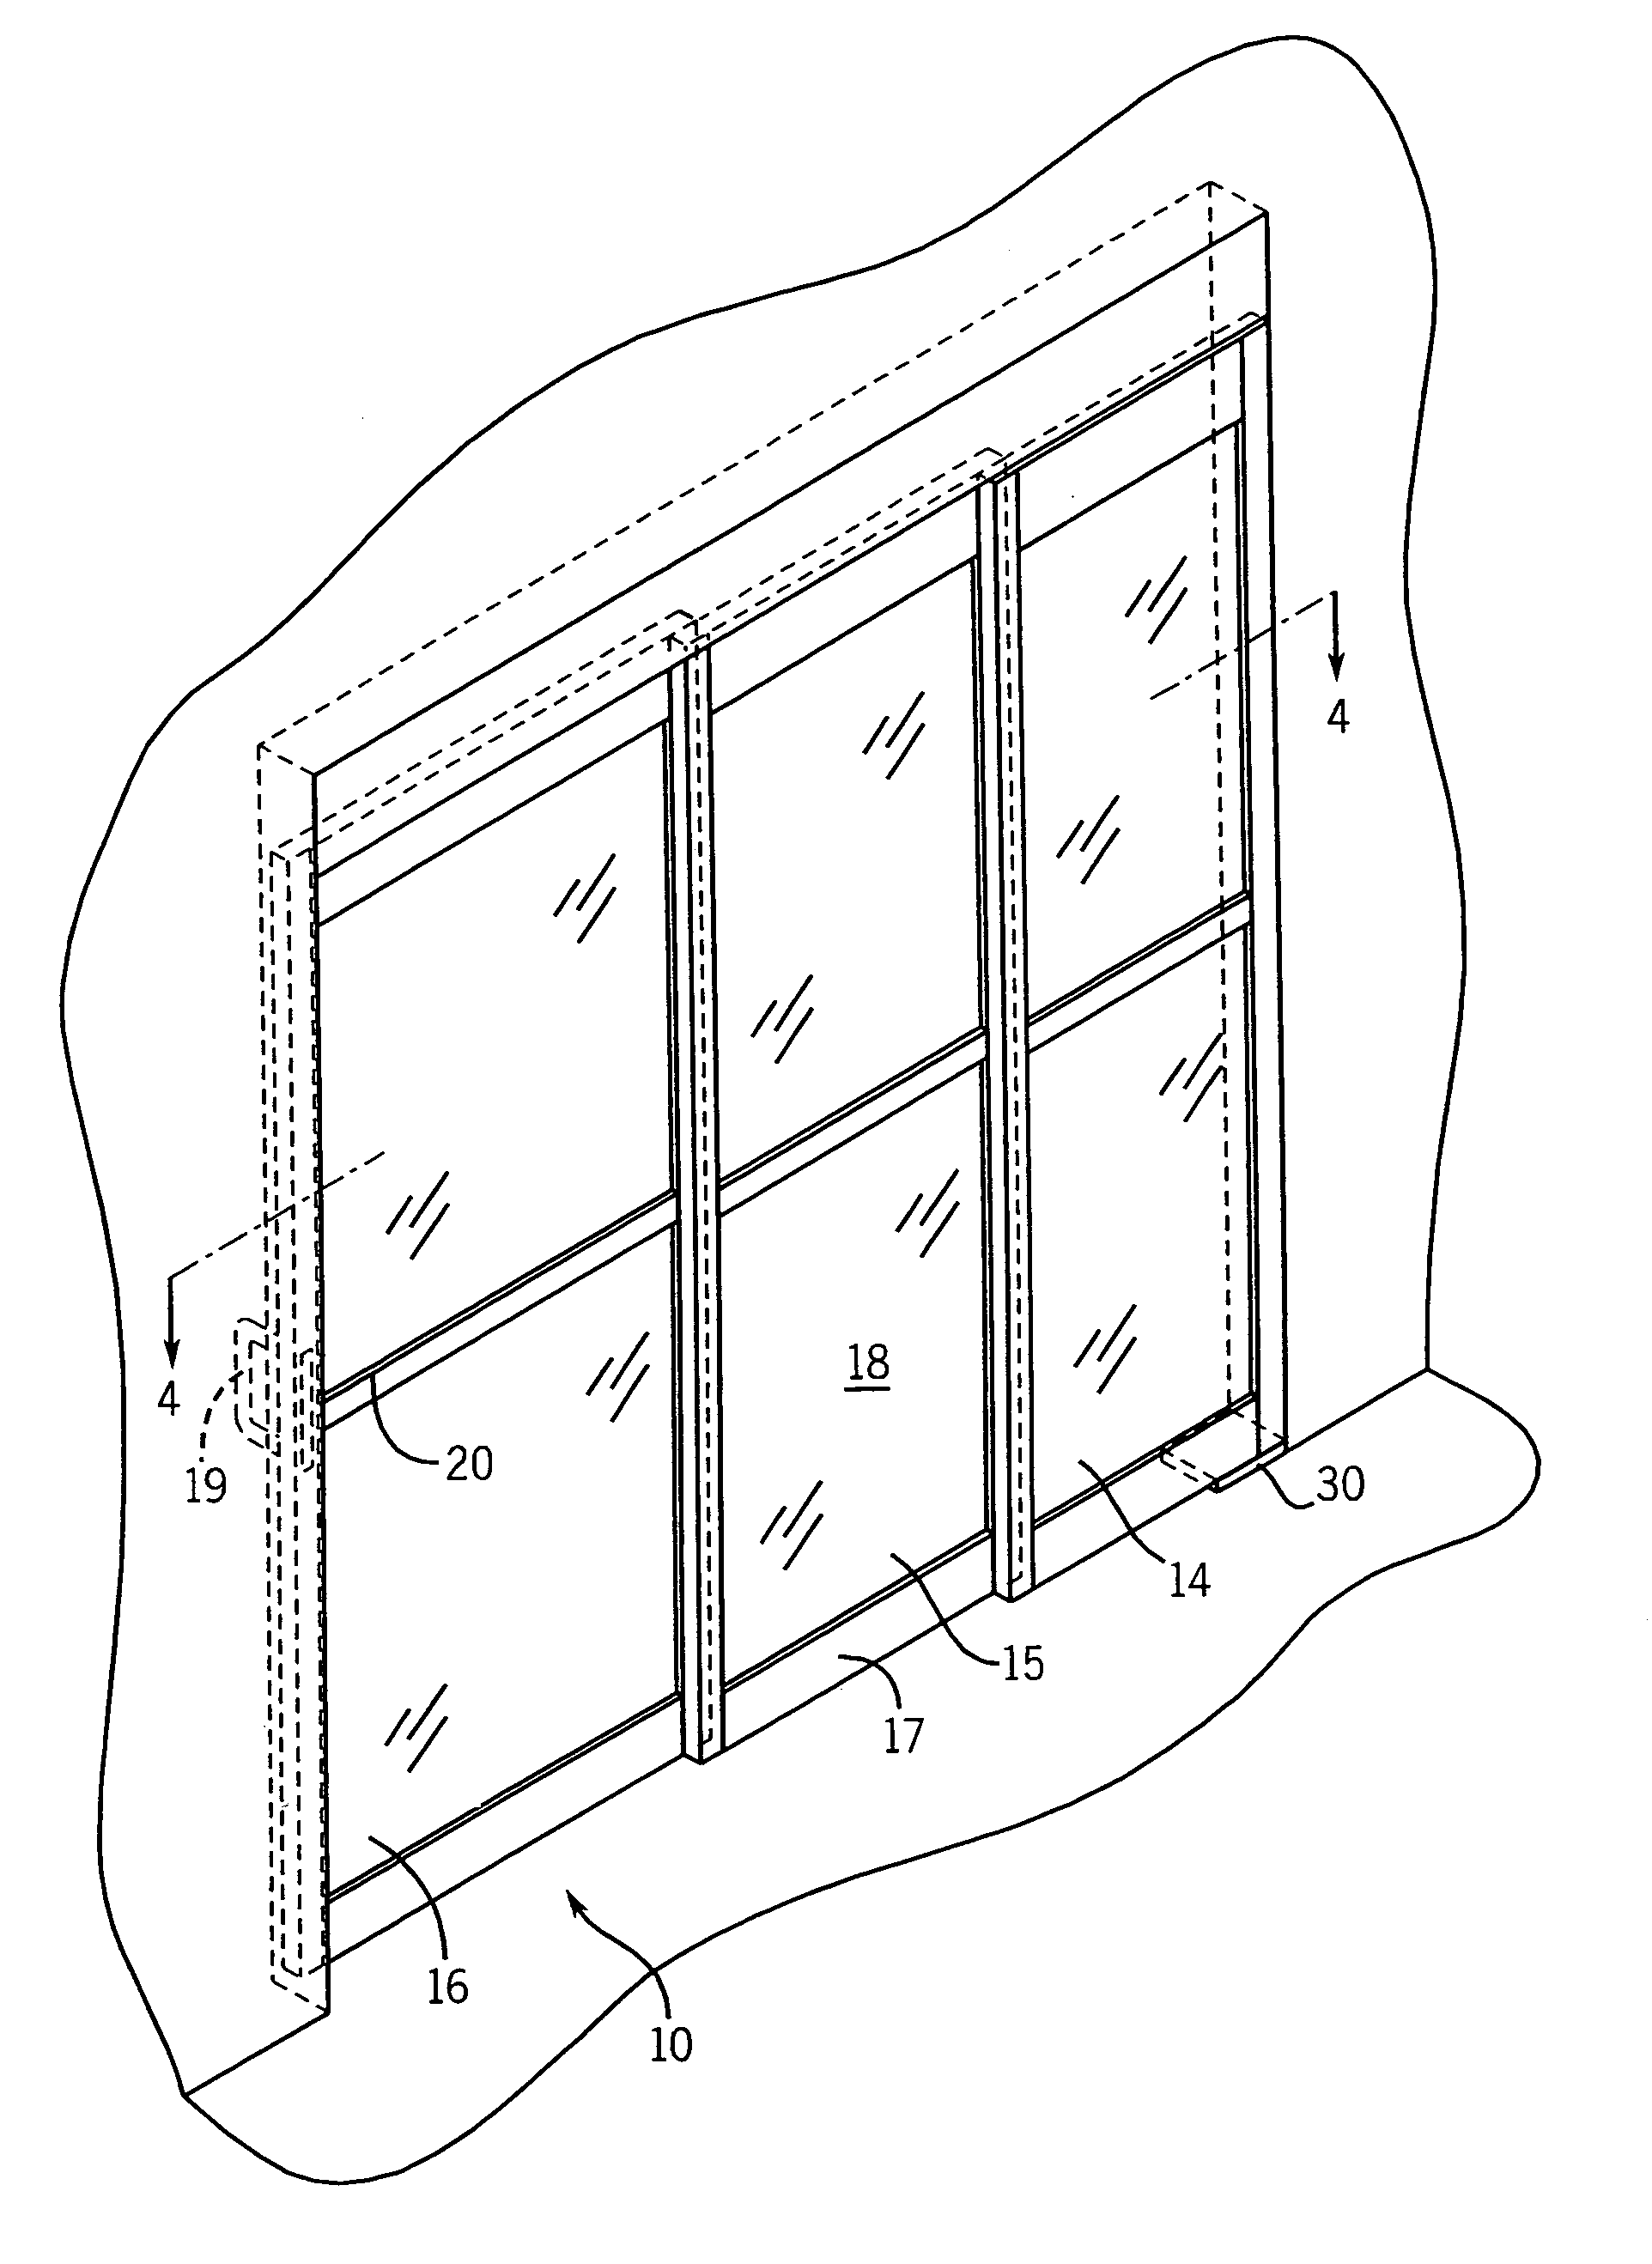 Slidable door assemblies with automatic pivot latching